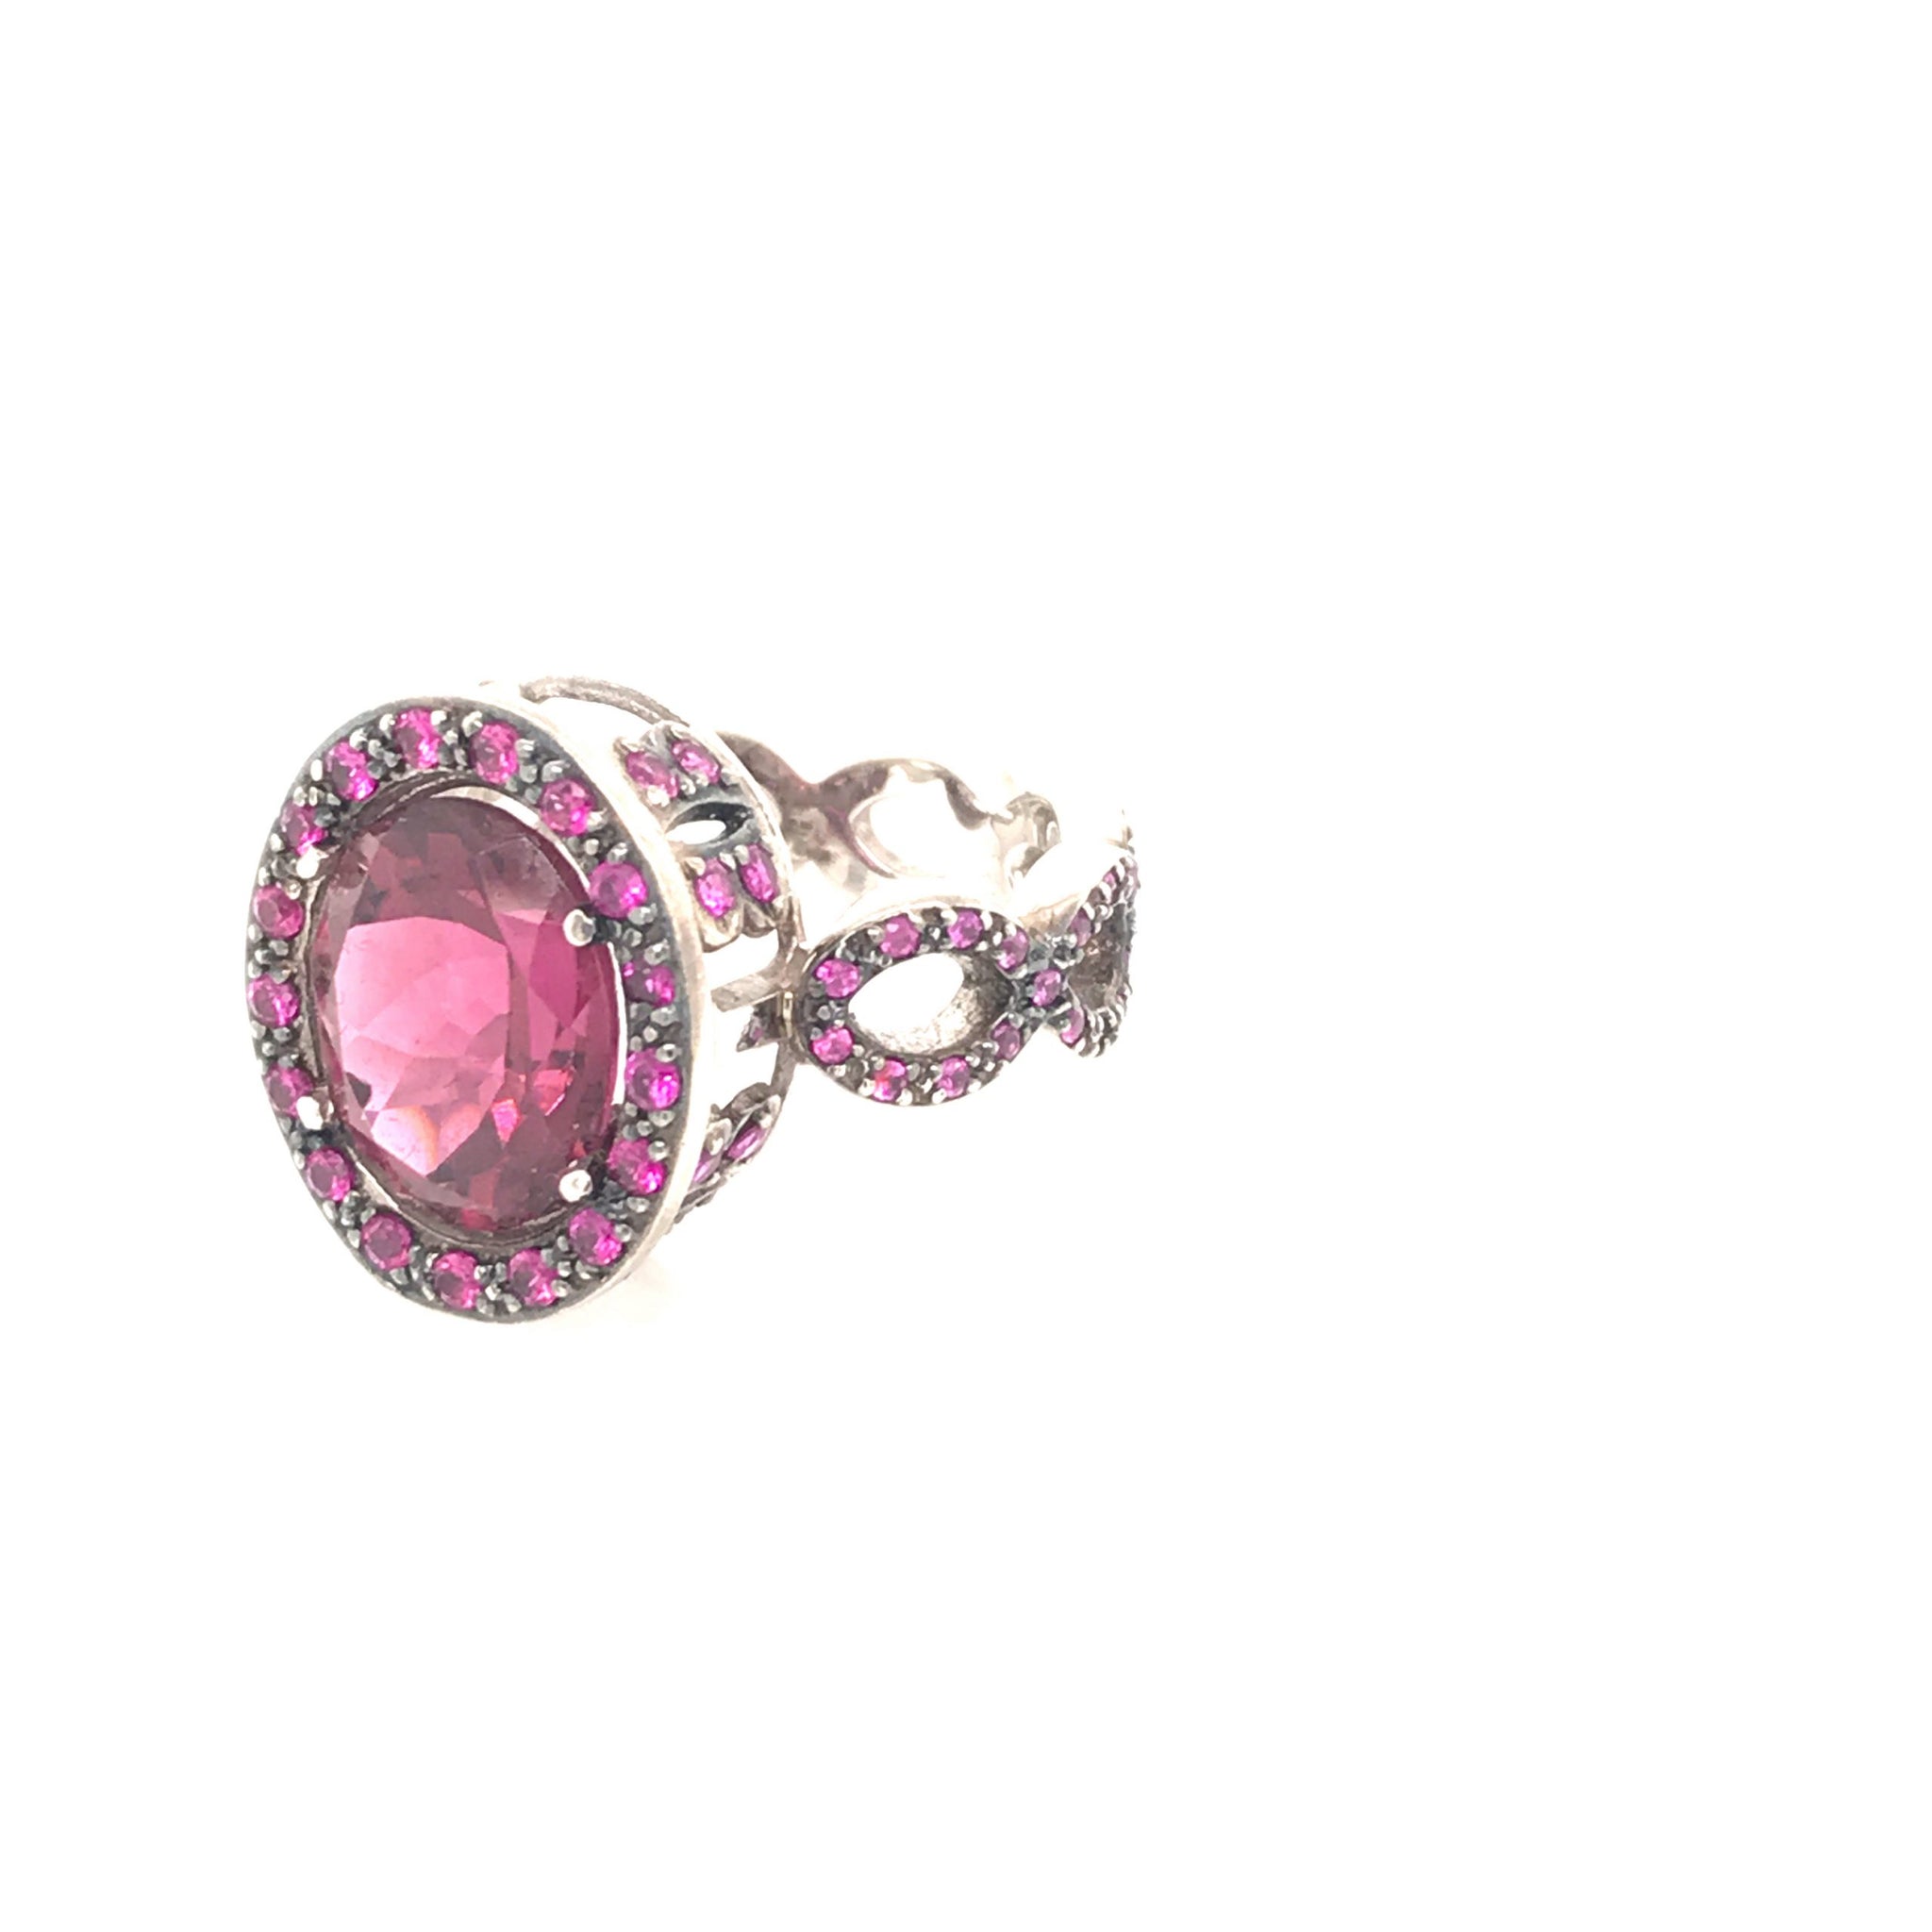 Oval Pink Tourmaline w Pave' Pink Sapphire Cocktail Ring